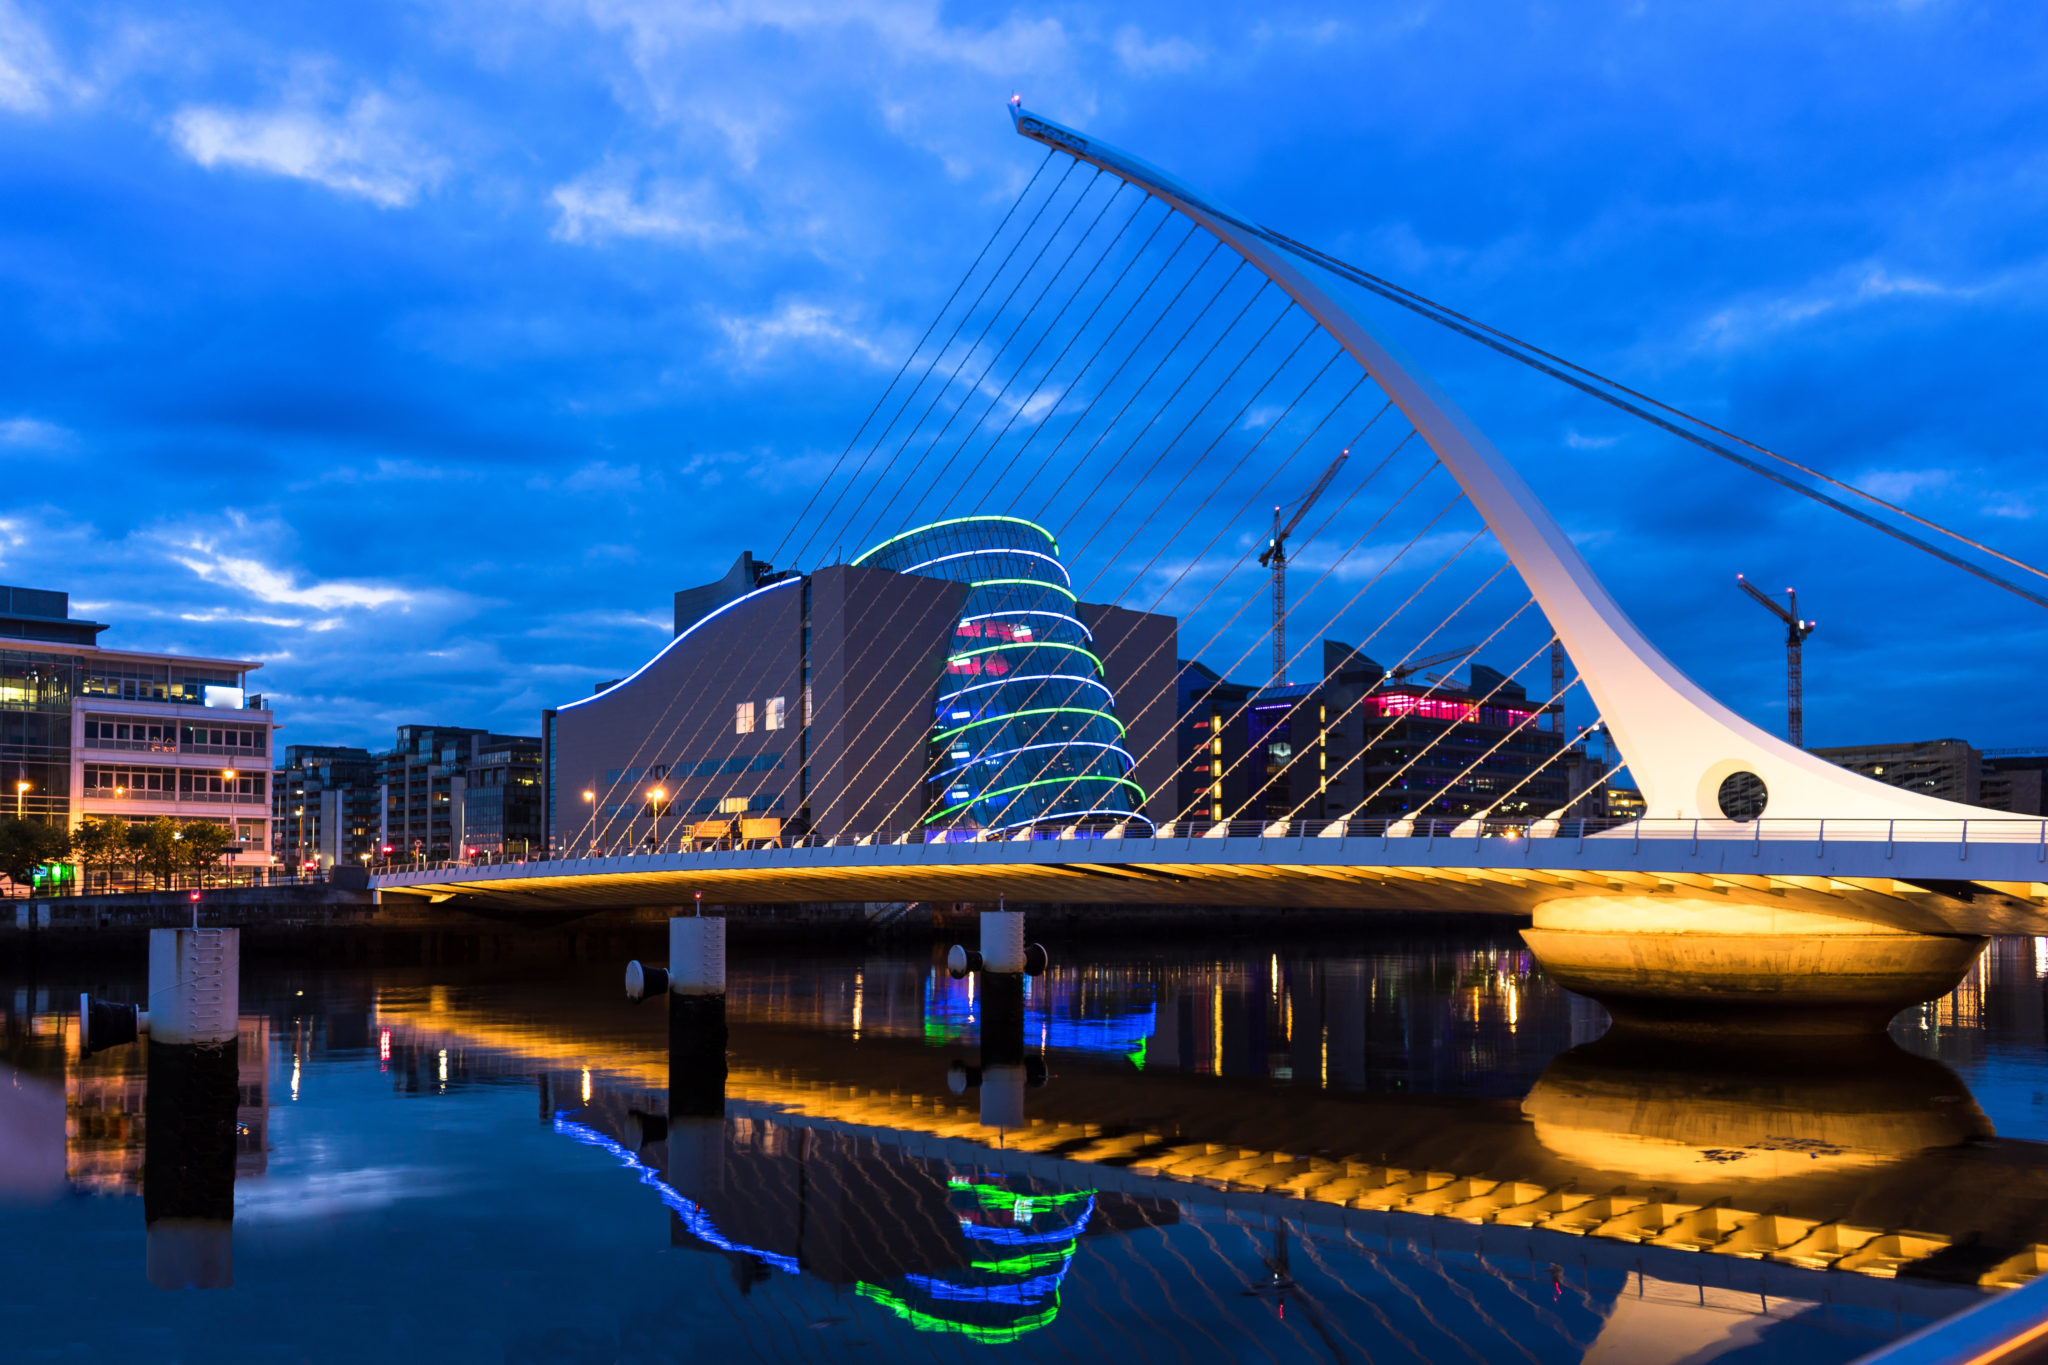 The Samuel Beckett Bridge and Convention Centre Dublin are seen in May 2019.